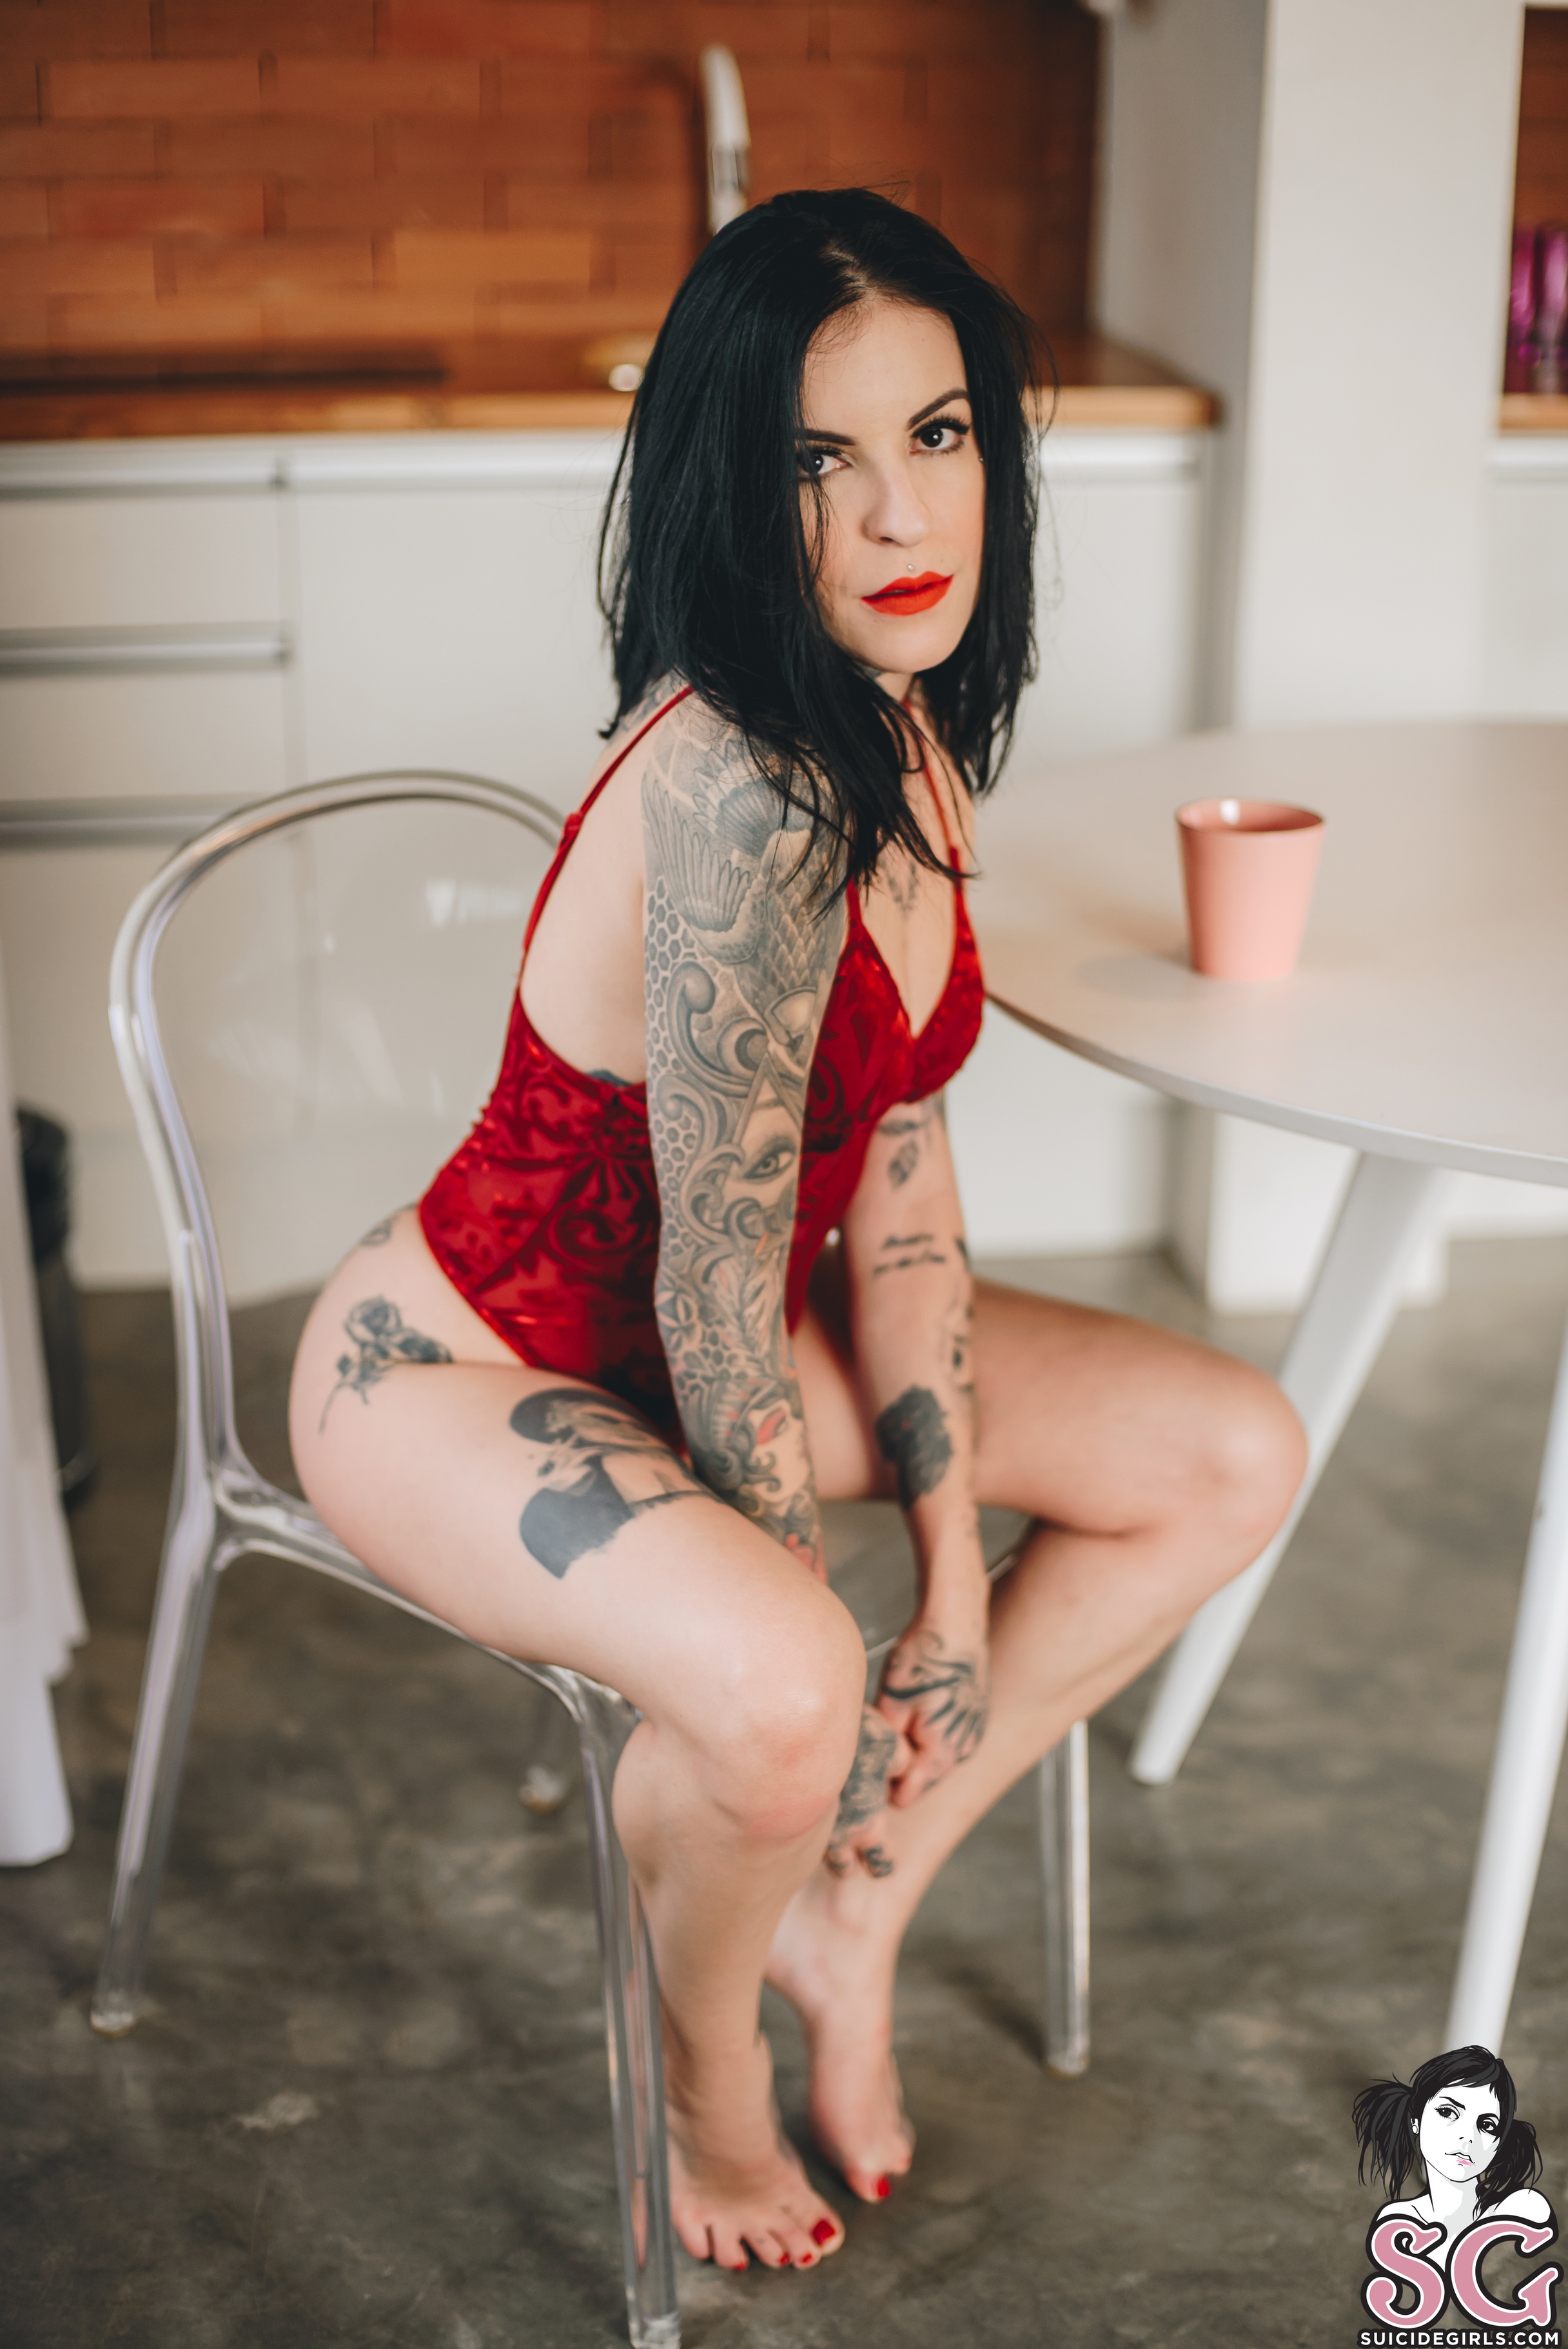 People 2432x3643 Lyn suicide Suicide Girls women portrait display watermarked chair sitting indoors tattoo inked girls one-piece-lingerie table painted toenails